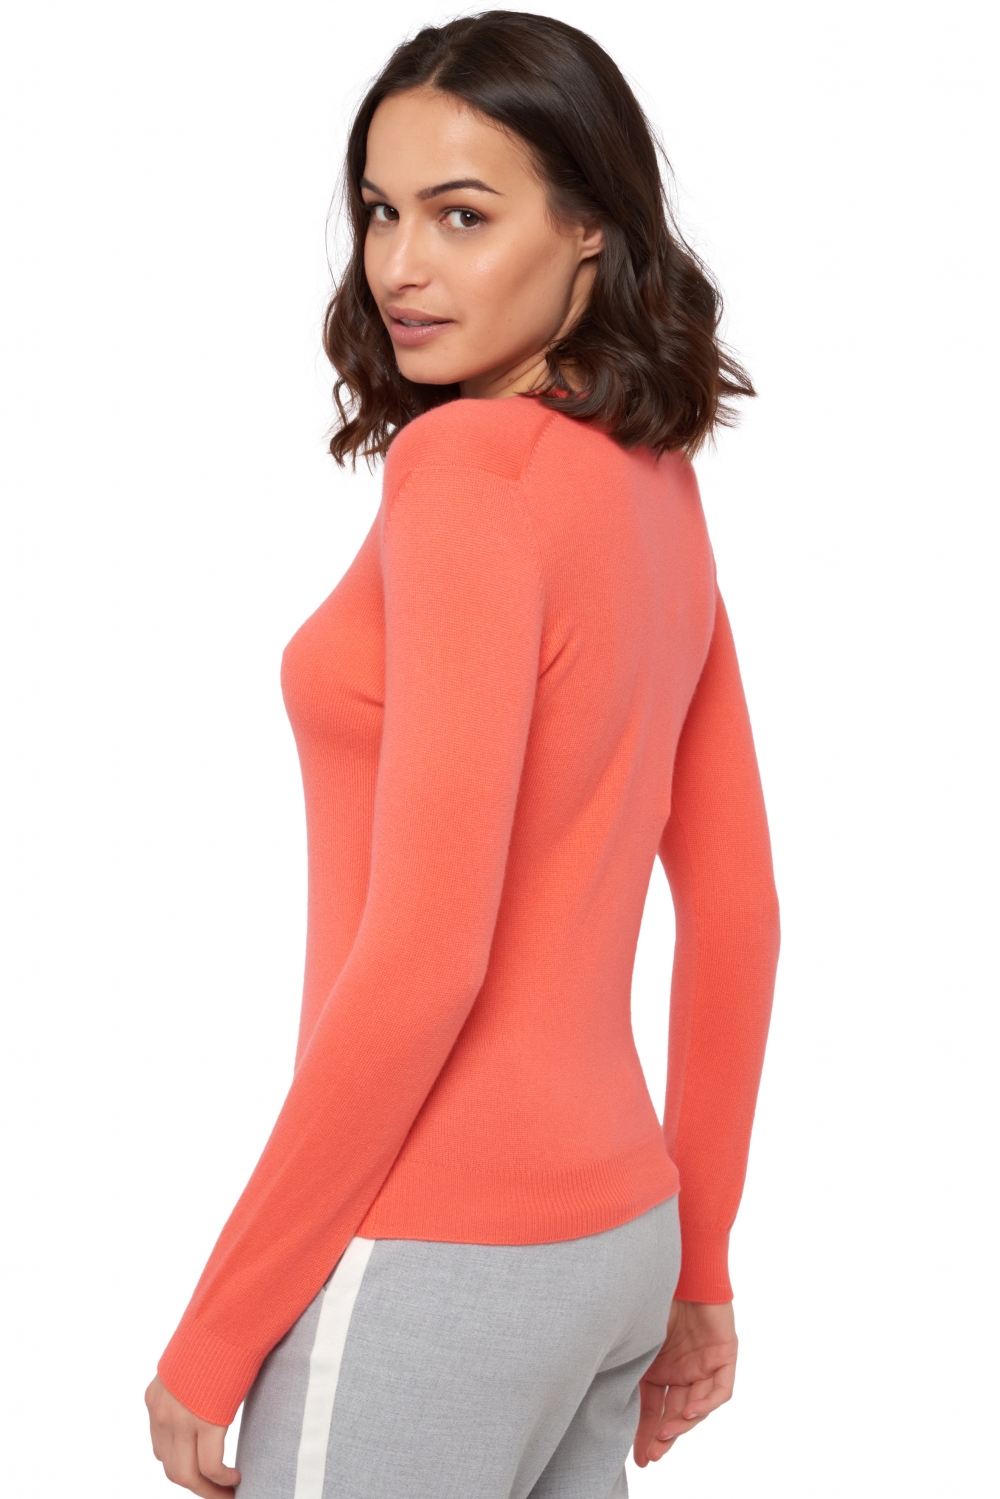 Cachemire pull femme col v faustine corail lumineux m